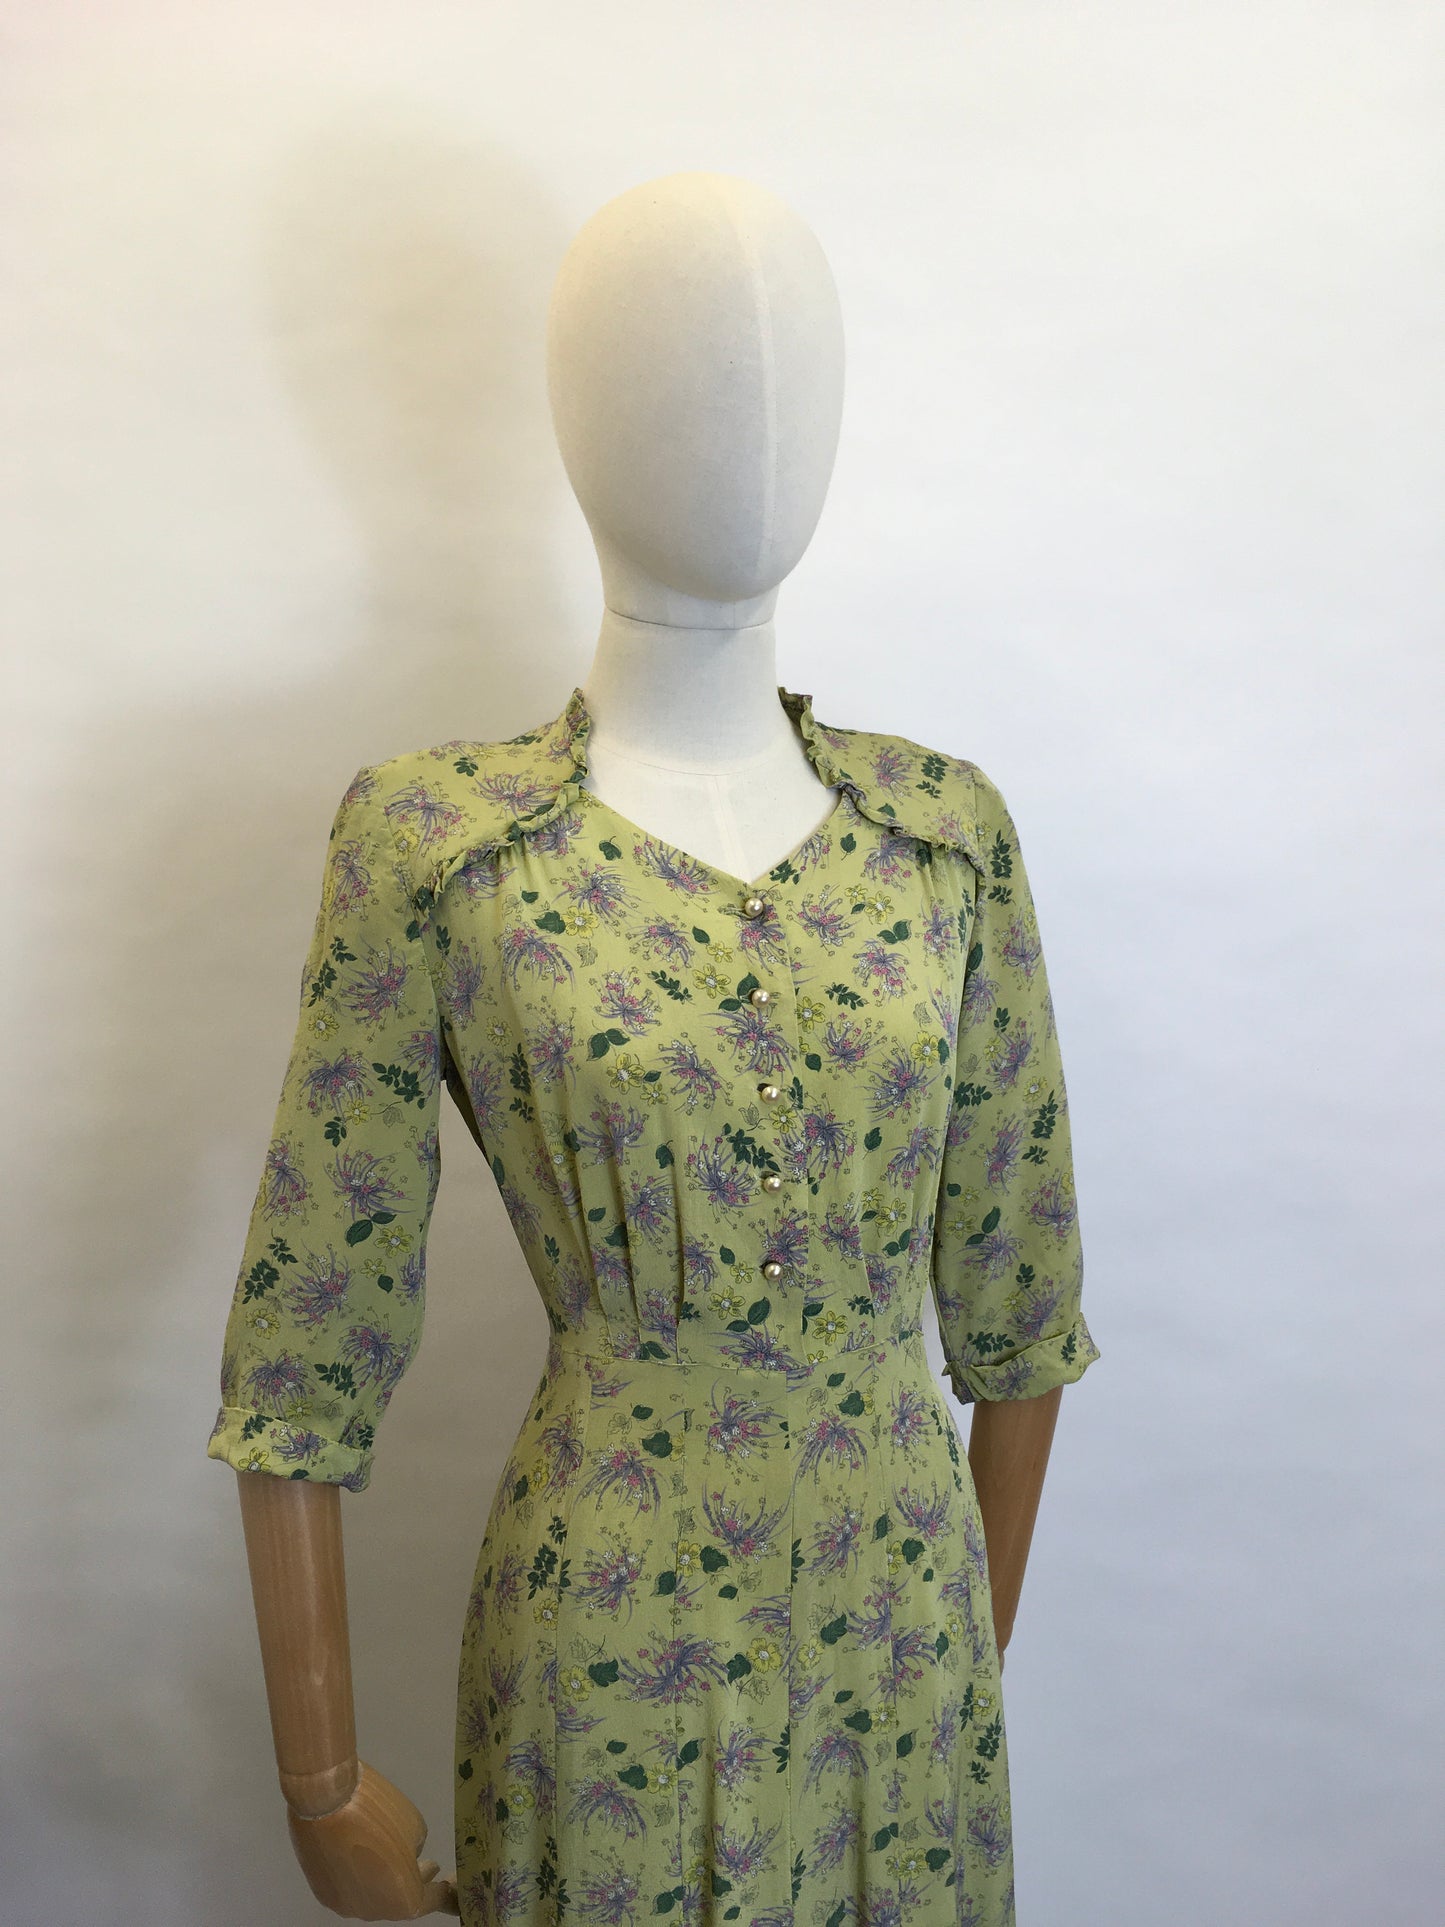 Original 1940’s Floral Day Dress - In a Beautiful Floral Crepe With a Warm Summer Colour Pallet